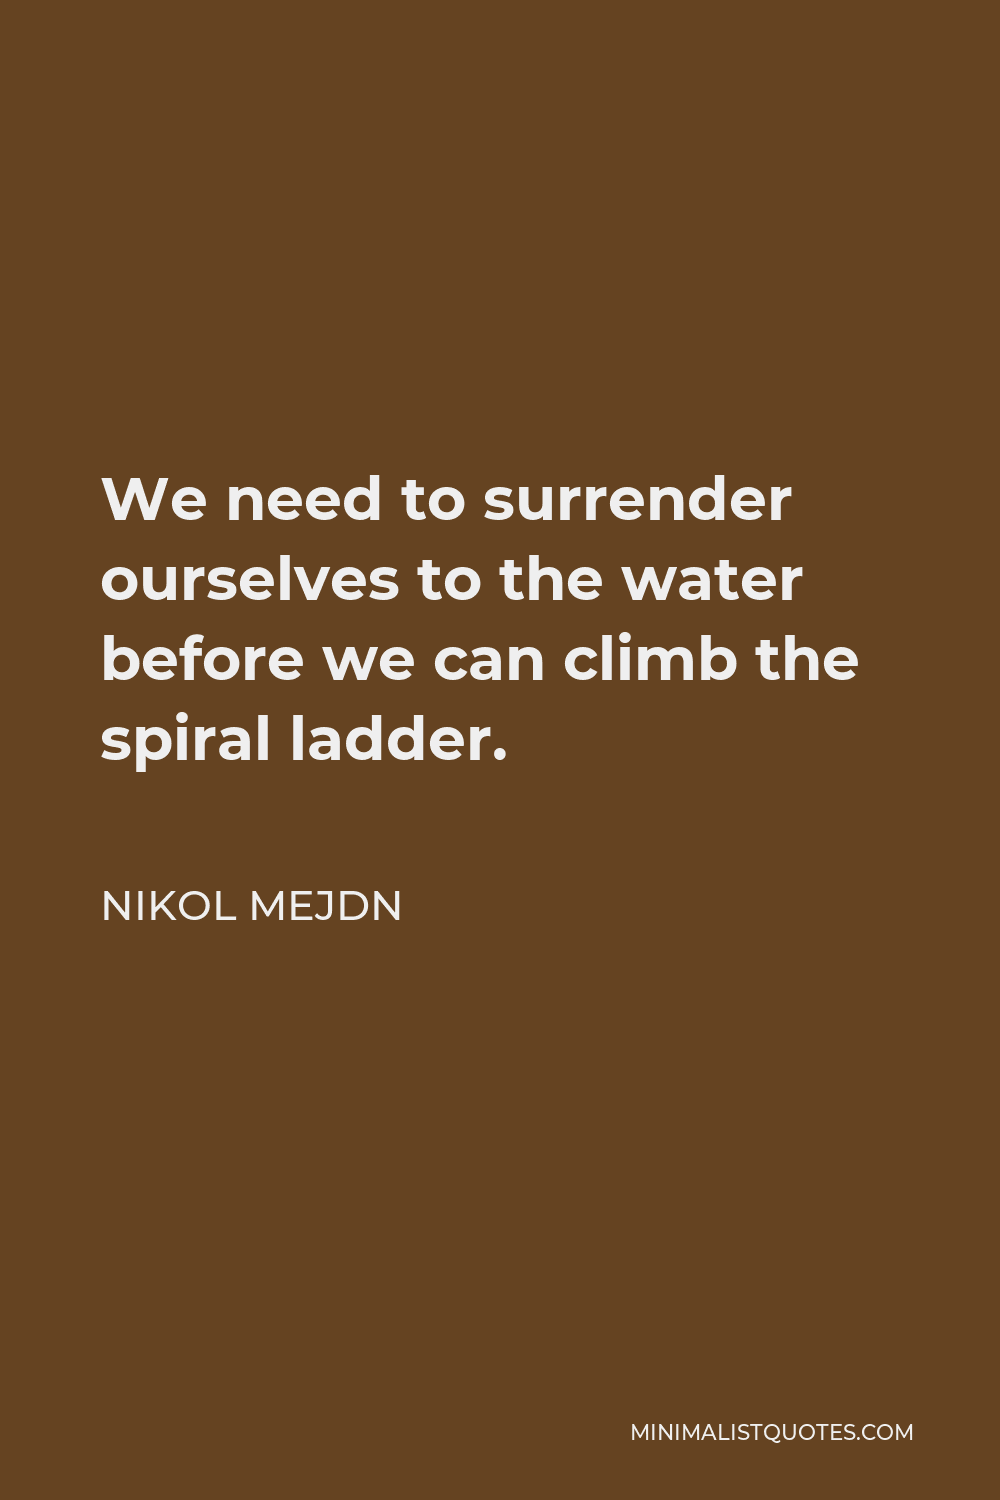 Nikol Mejdn Quote - We need to surrender ourselves to the water before we can climb the spiral ladder.